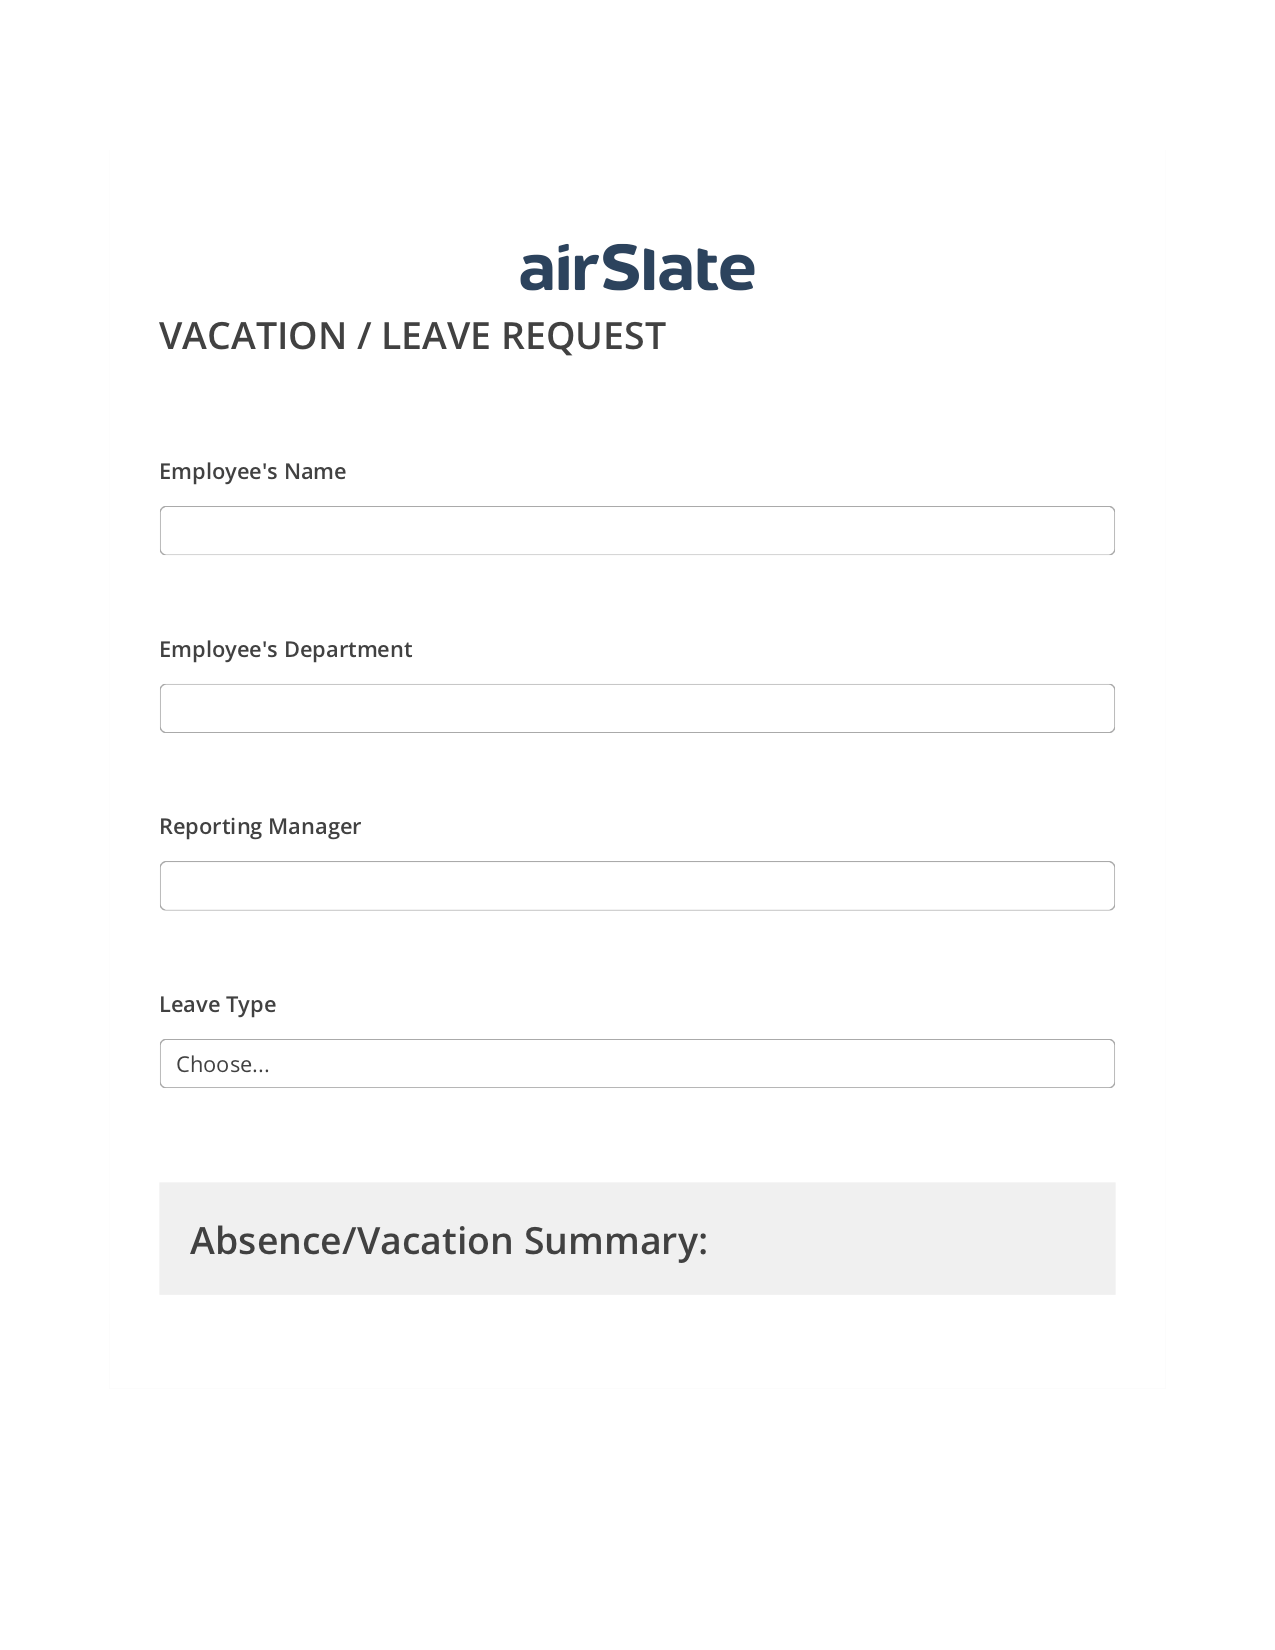 Vacation/Leave Request Workflow Pre-fill Dropdowns from Excel Bot, Add Tags to Slate Bot, Archive to Box Bot